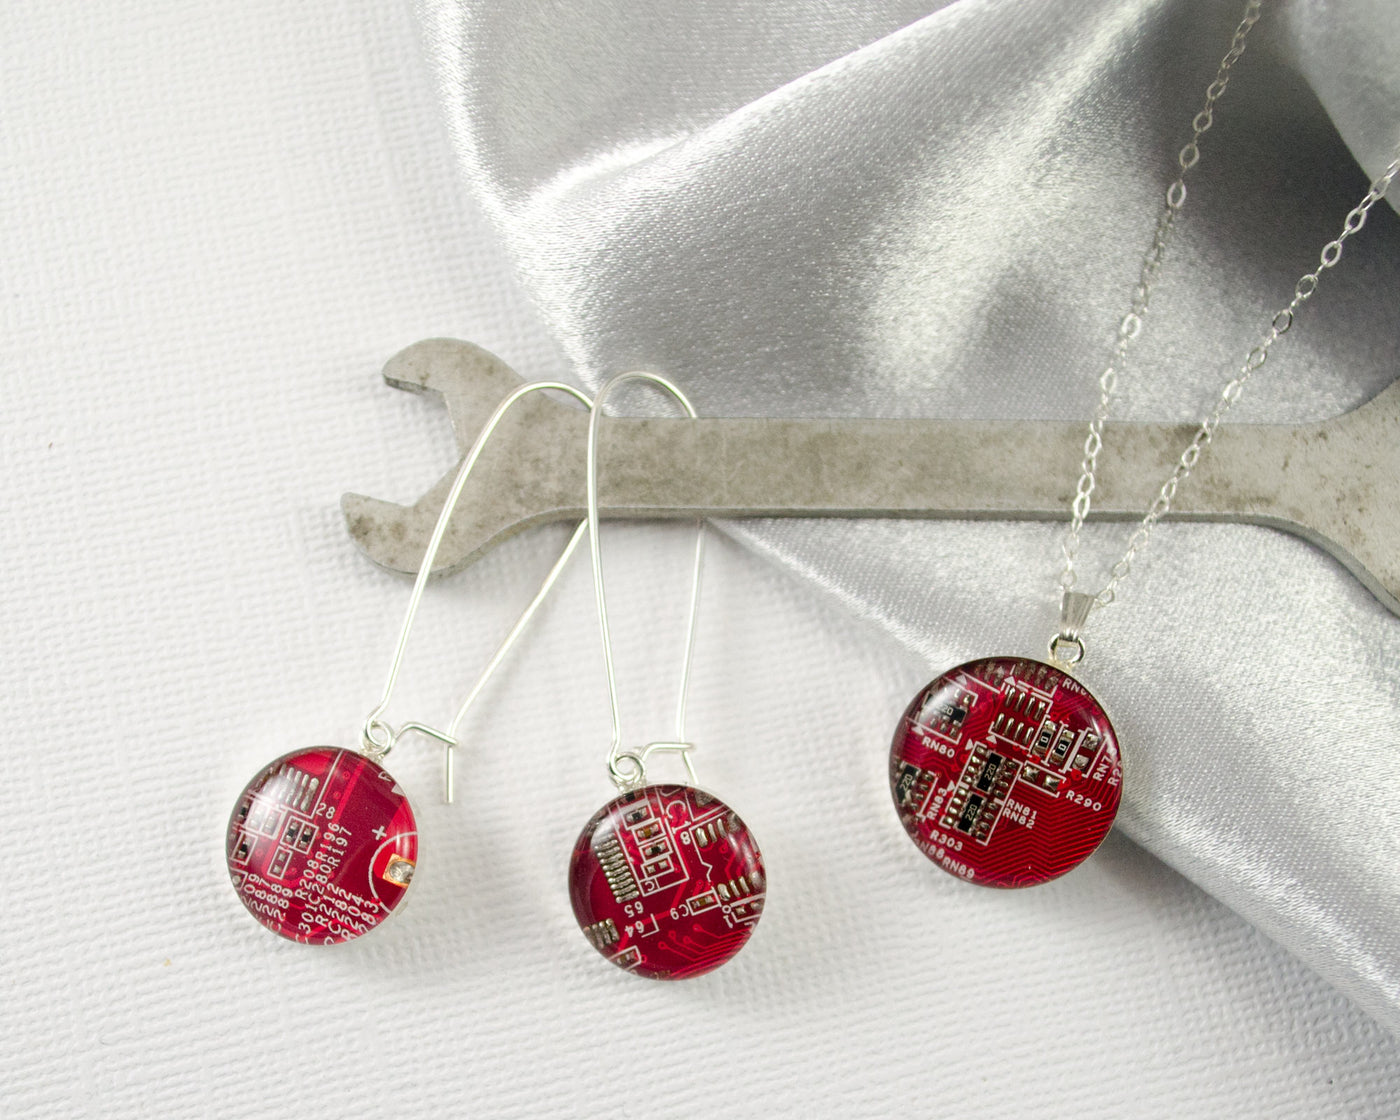 Circuit Board Necklace and Earring Set Red, Sterling Silver Jewelry, Wearable Technology, ENgineer Gift, Reclaimed Jewelry, Geek Chic Gift